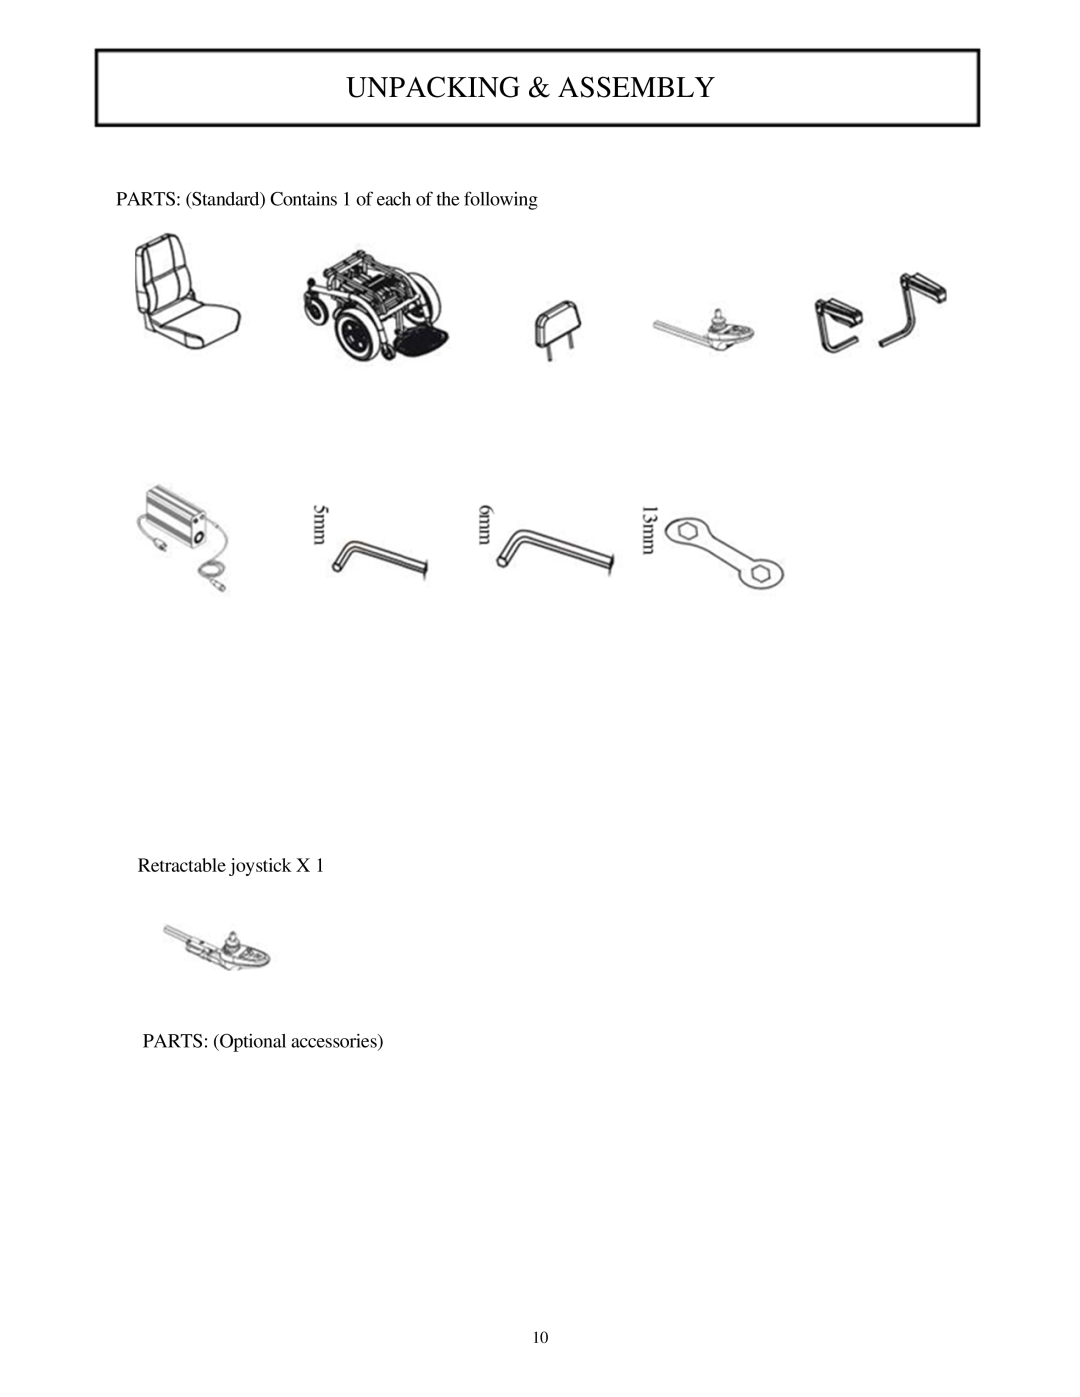 Drive Medical Design 2850-18, 2850-20 manual Unpacking & Assembly, PARTS Standard Contains 1 of each of the following 